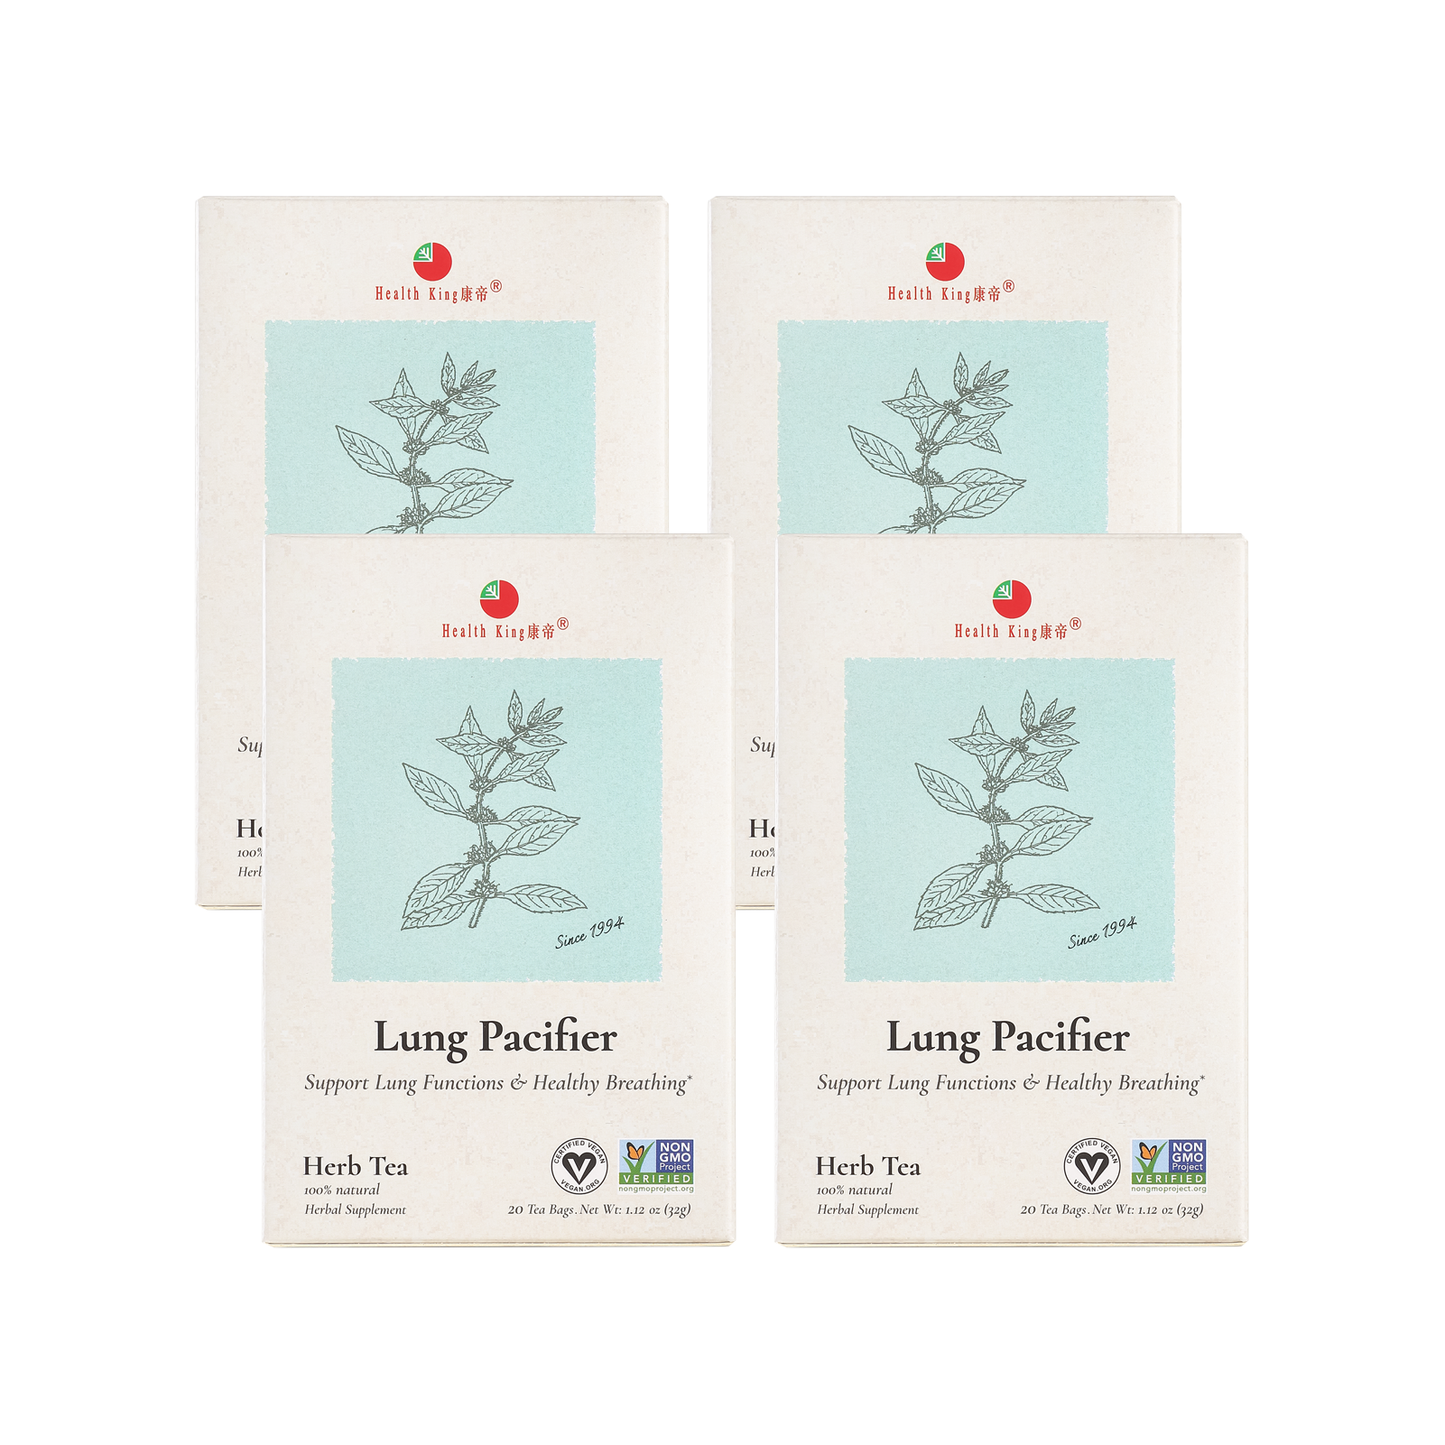 Lung Pacifier Herb Tea | Support Lung Functions & Healthy Breathing